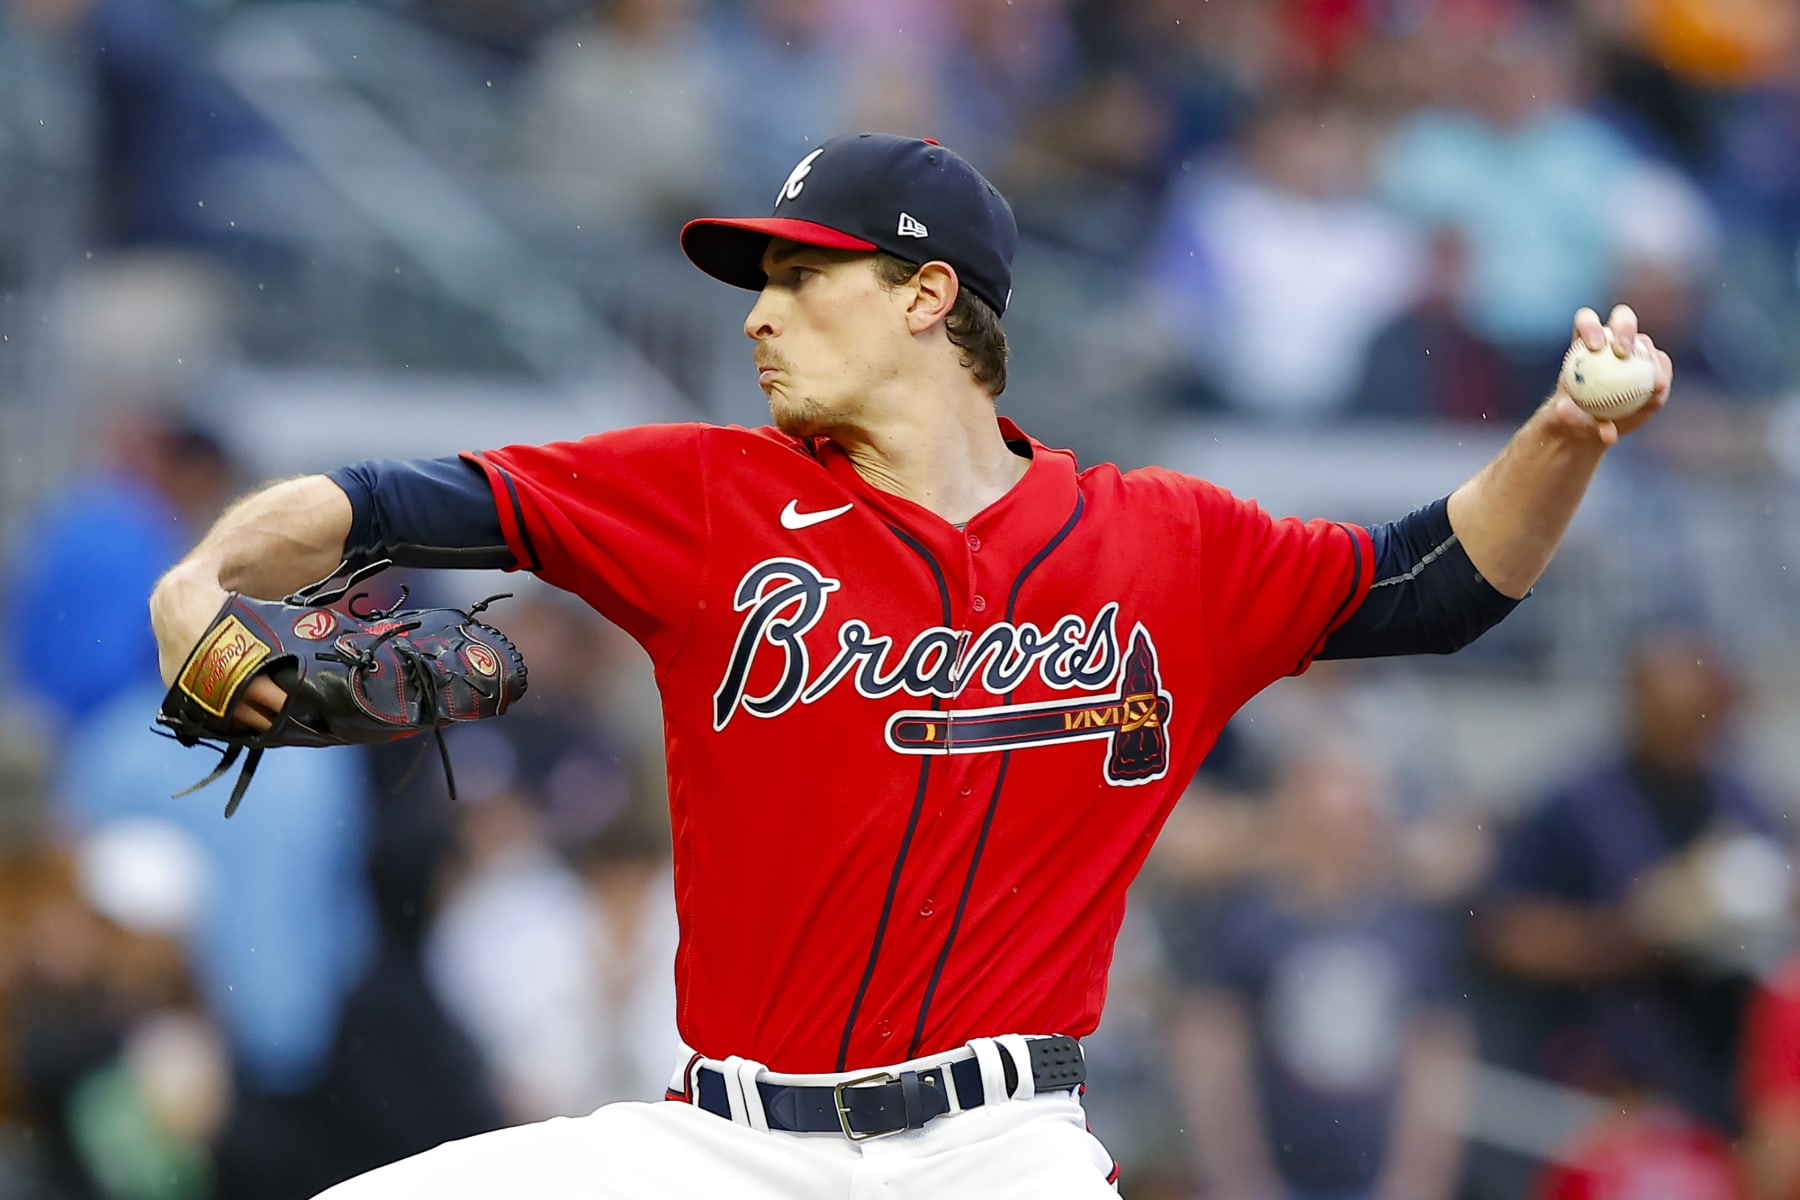 Braves 2021 Player Previews: Max Fried Headlines the Braves Rotation